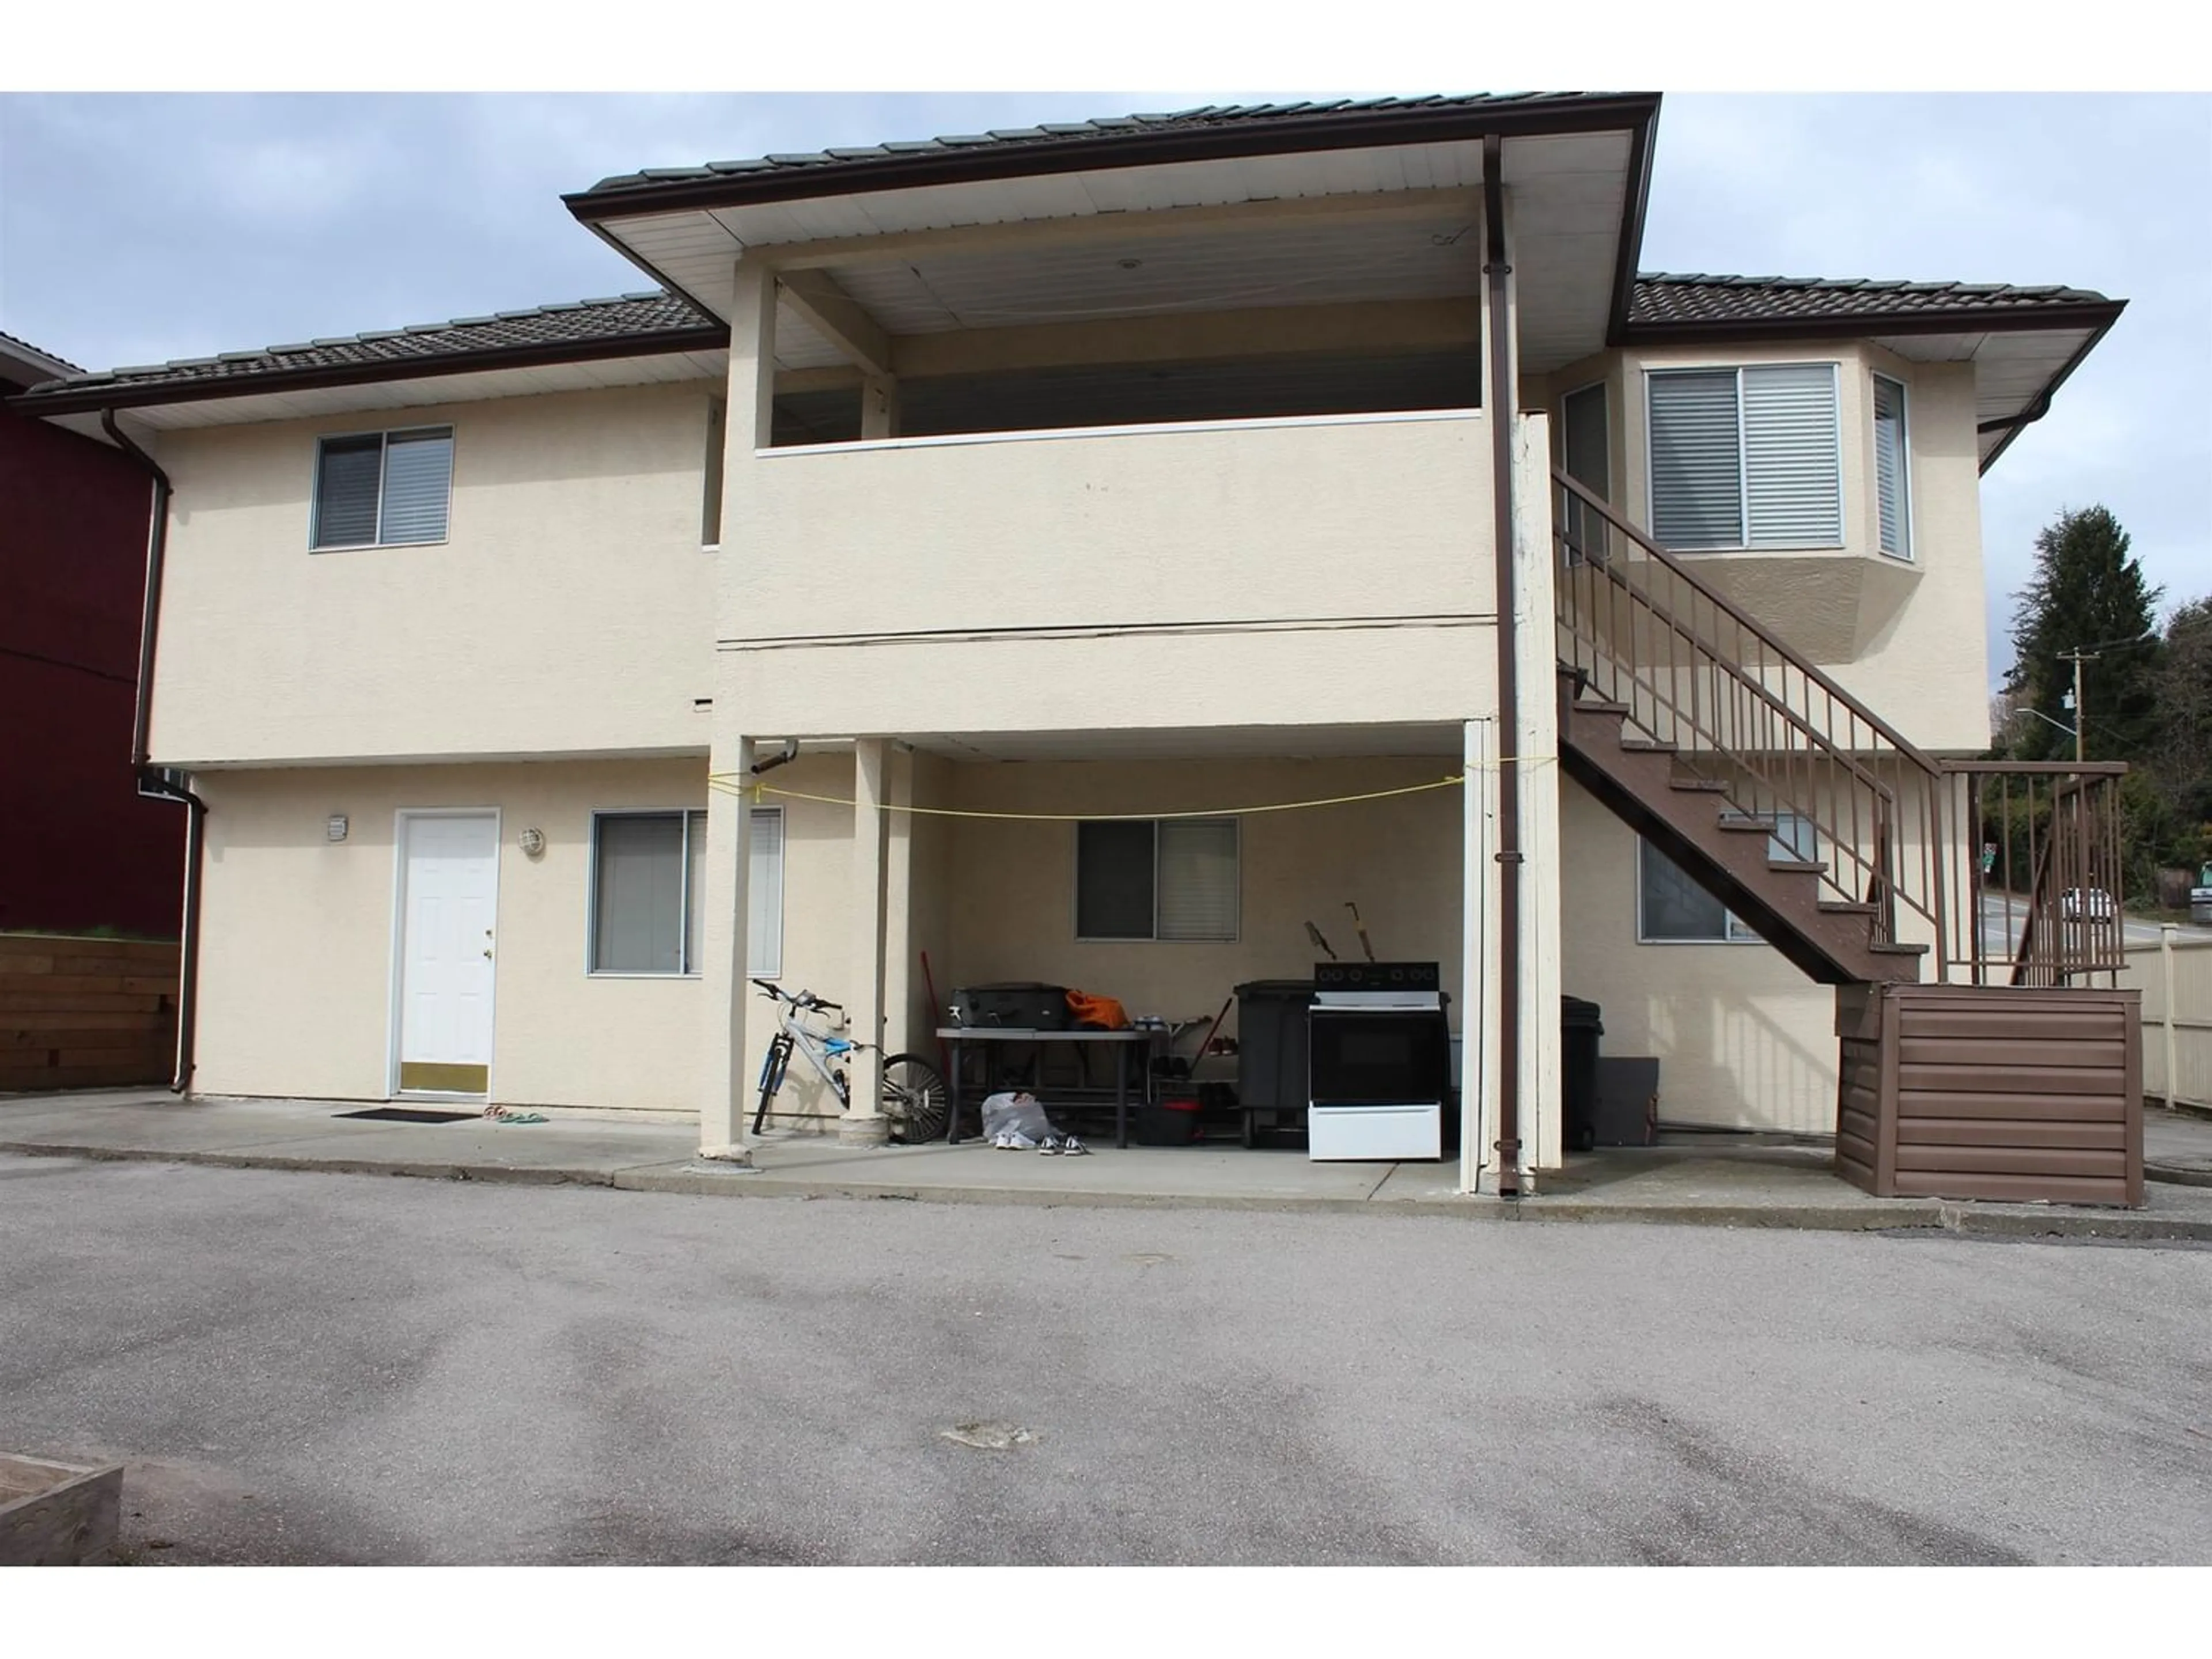 A pic from exterior of the house or condo for 14392 67A AVENUE, Surrey British Columbia V3W0J3